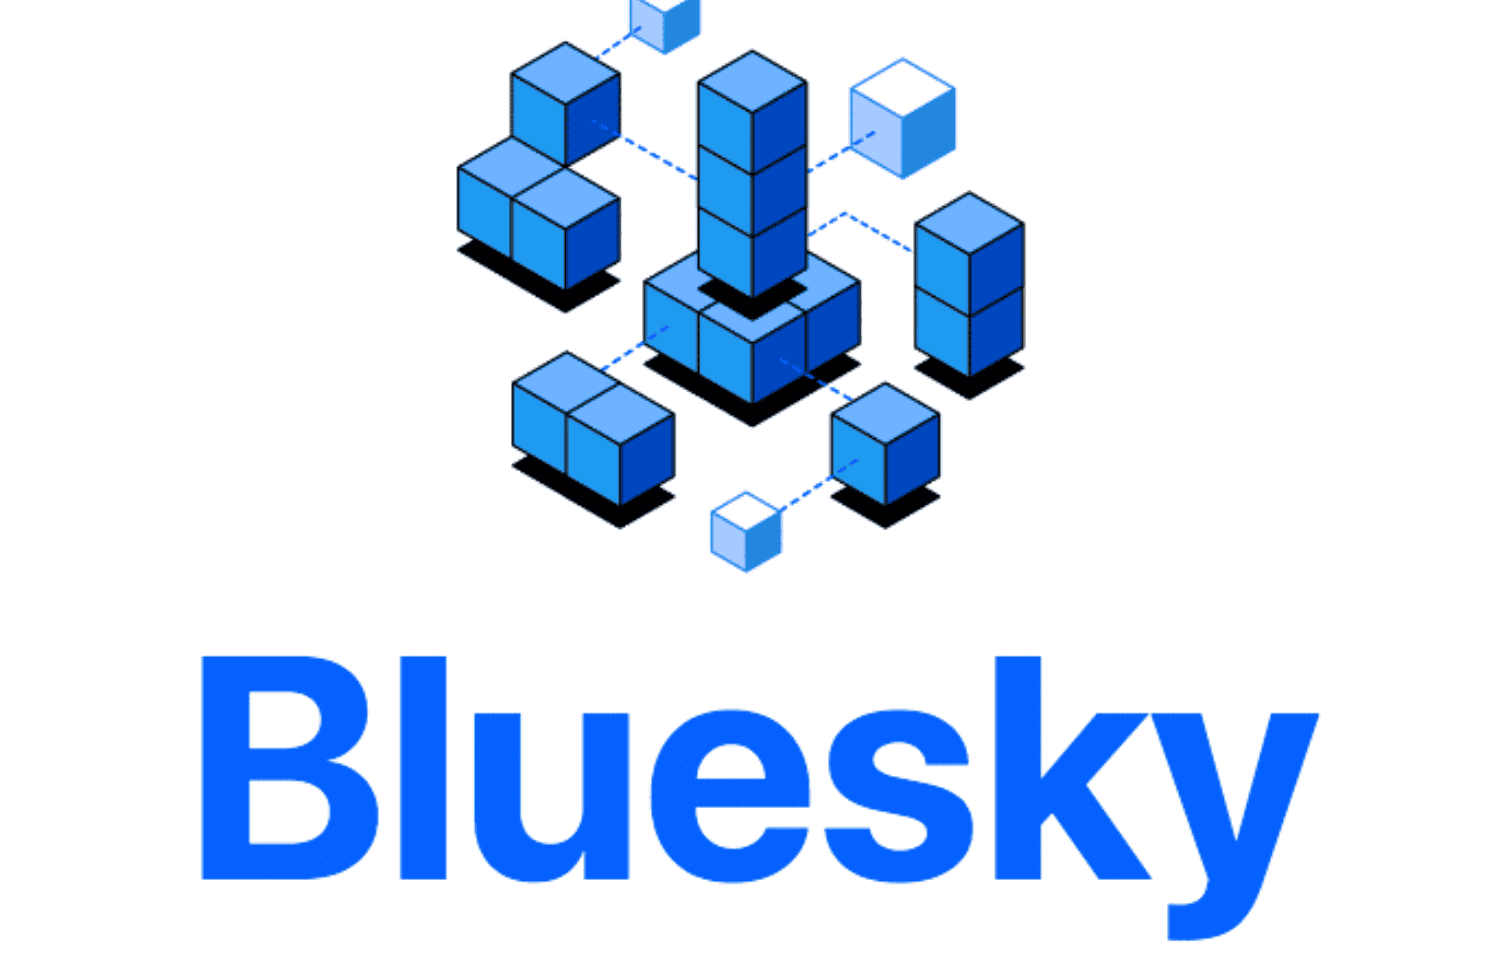 Get Ready to Experience the Future of Social Media: Bluesky by Jack Dorsey is Here!